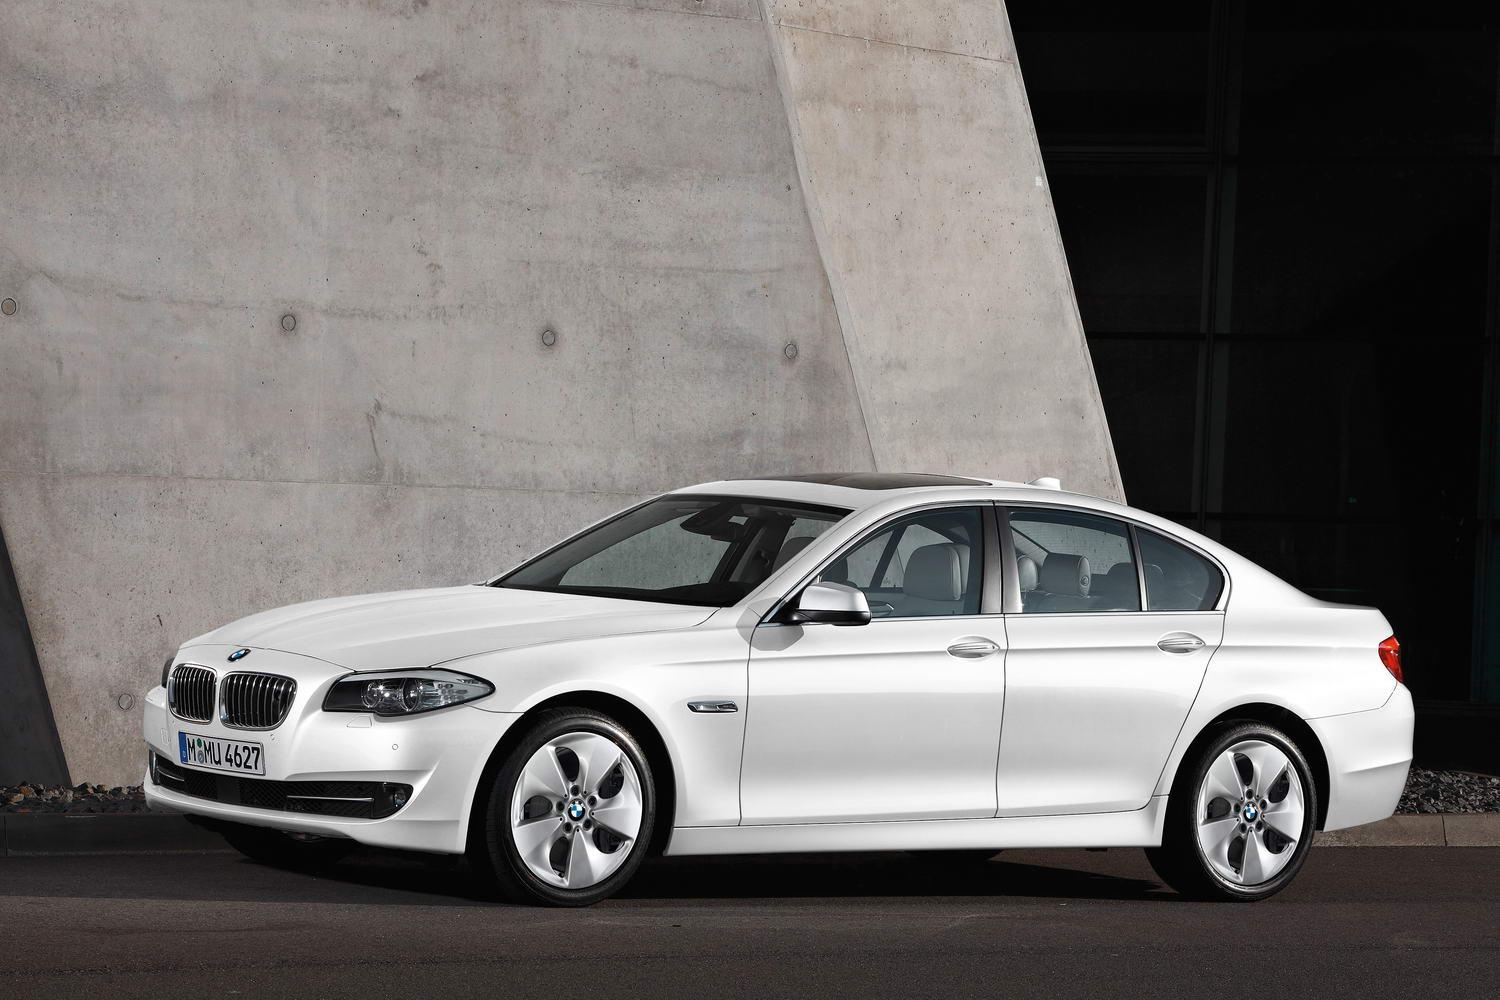 BMW 5 Series F10 (6th Gen) - What To Check Before You Buy